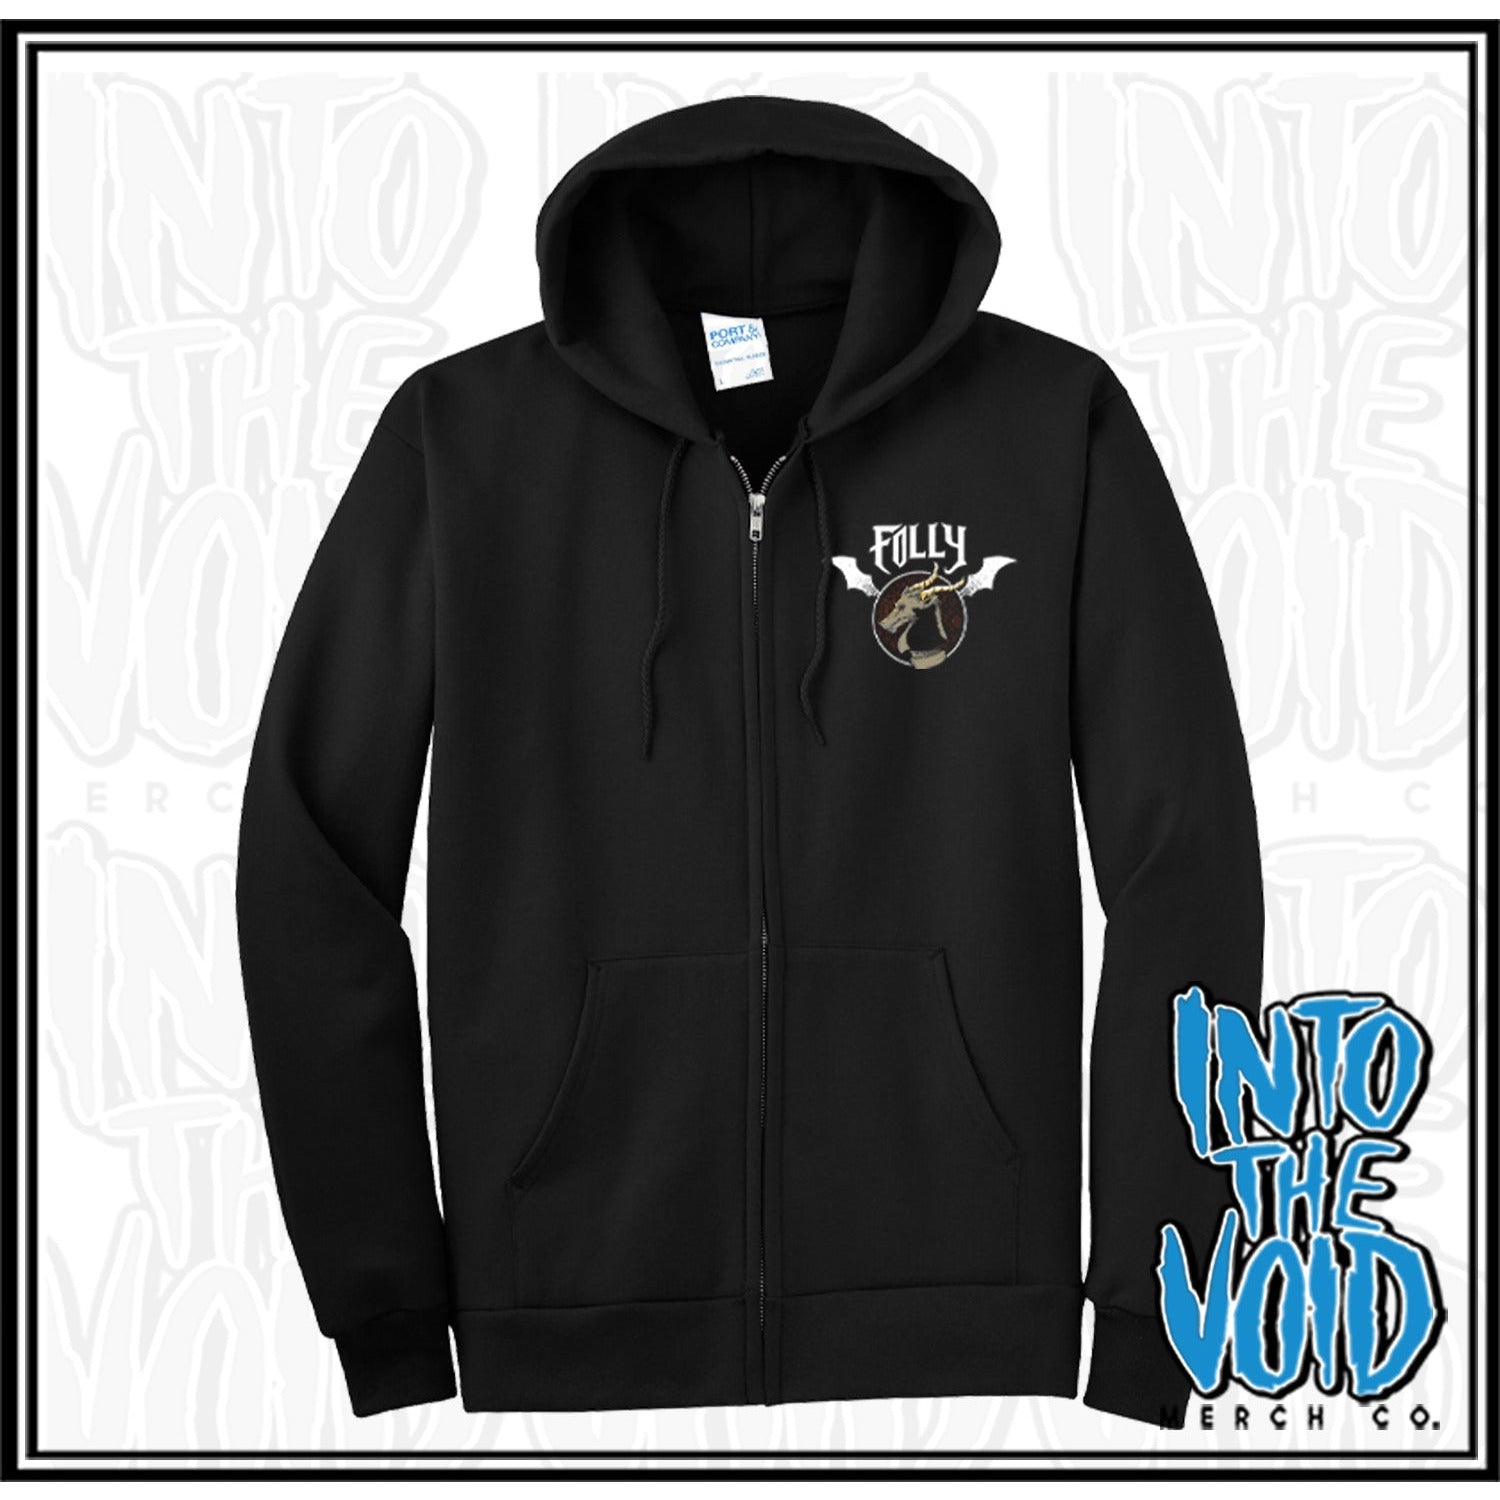 FOLLY - NJ SEAL - Hooded Zip-Up Sweatshirt - INTO THE VOID Merch Co.